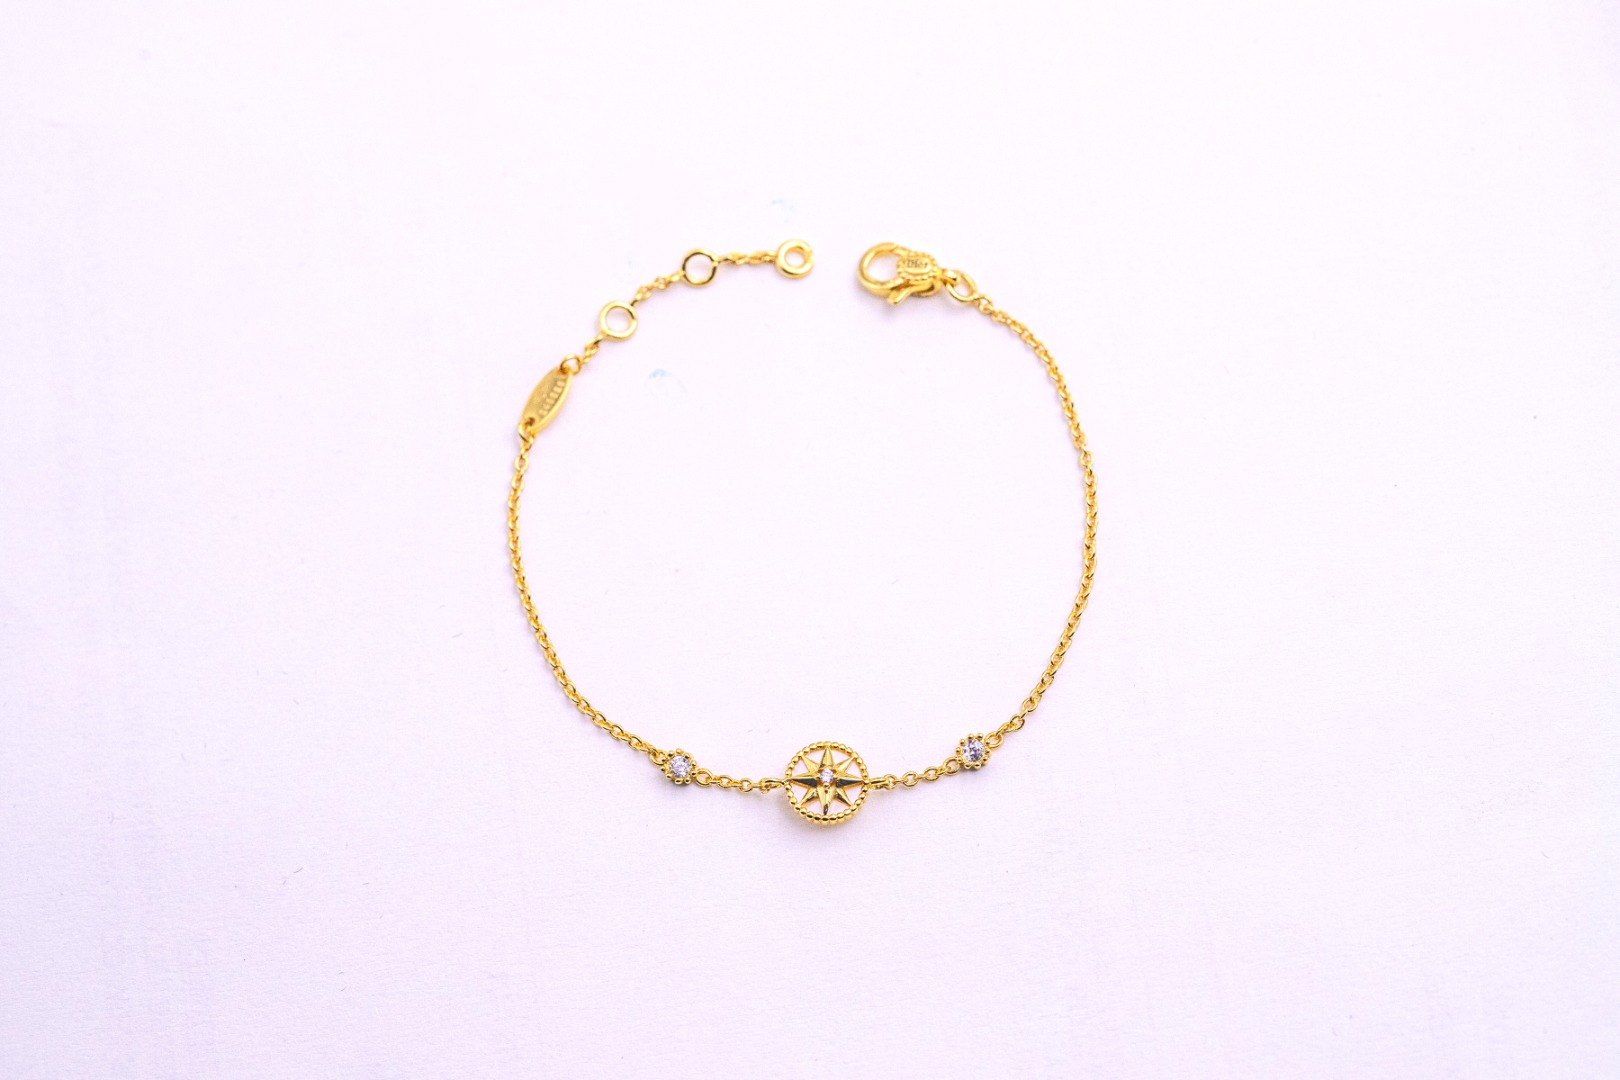 Dior Jewelry Bracelet Gold Rose White Yellow Victoire Chains